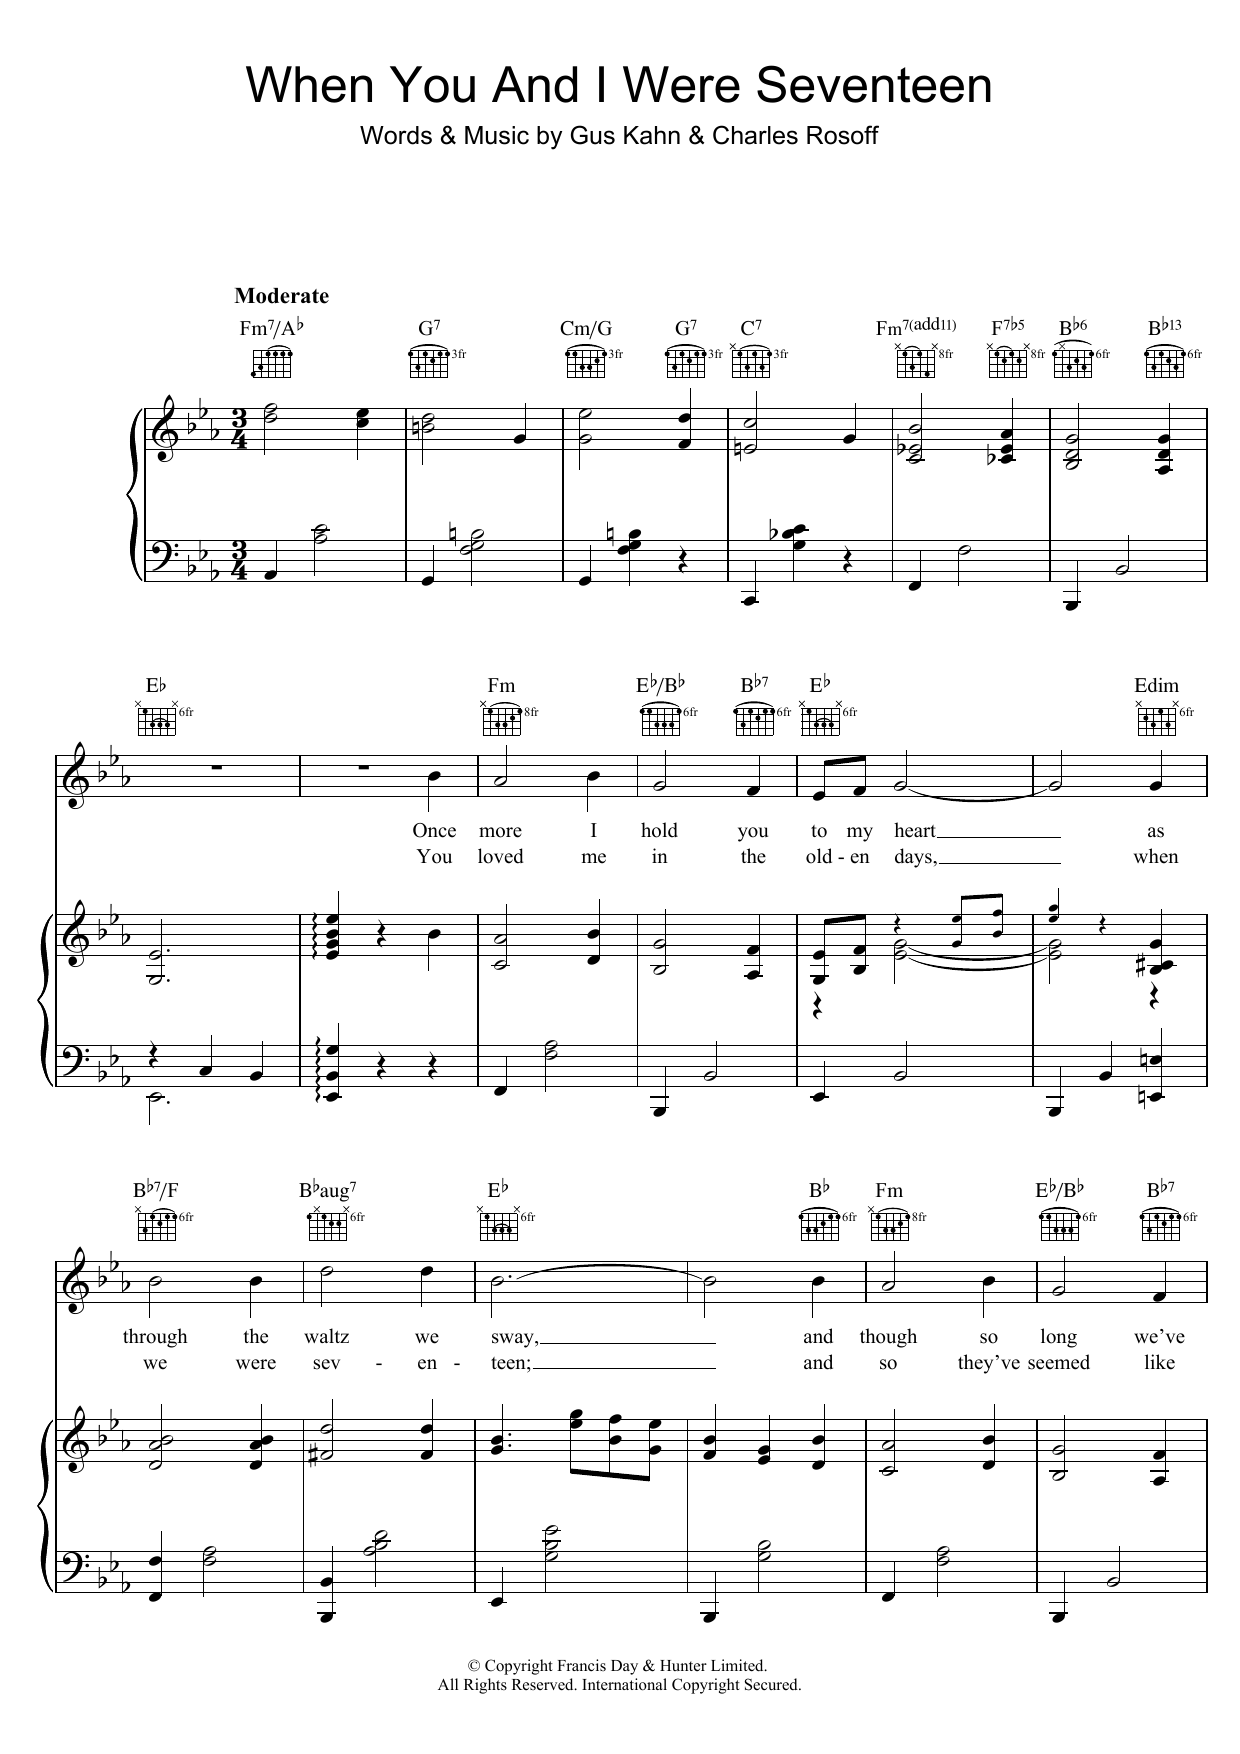 Download Chas Rosoff When You And I Were Seventeen Sheet Music